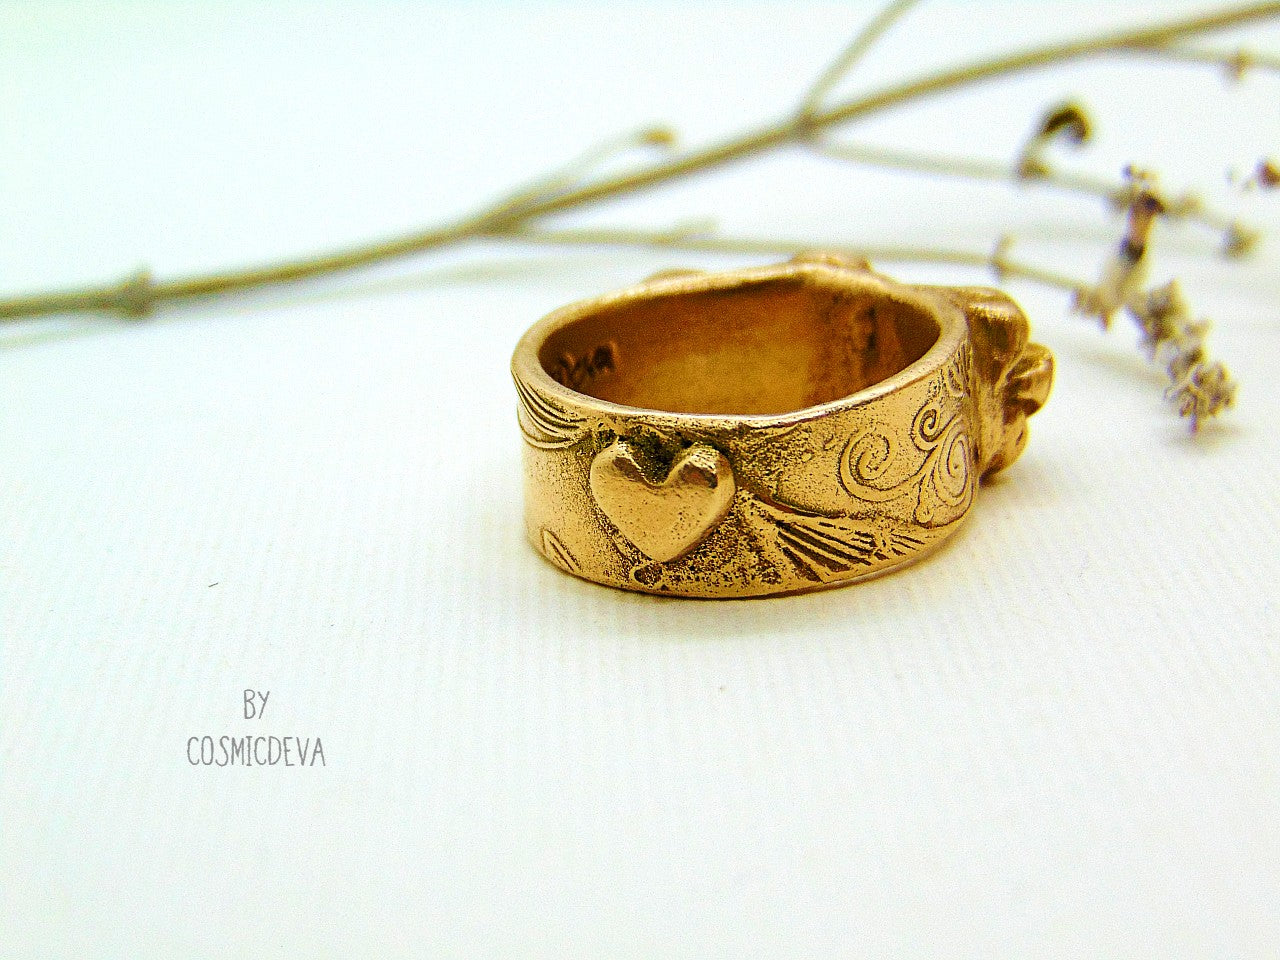 Handmade and hand formed unique organic solid gold bronze roman style ring featuring three roses with a heart 💕 on the bottom side.